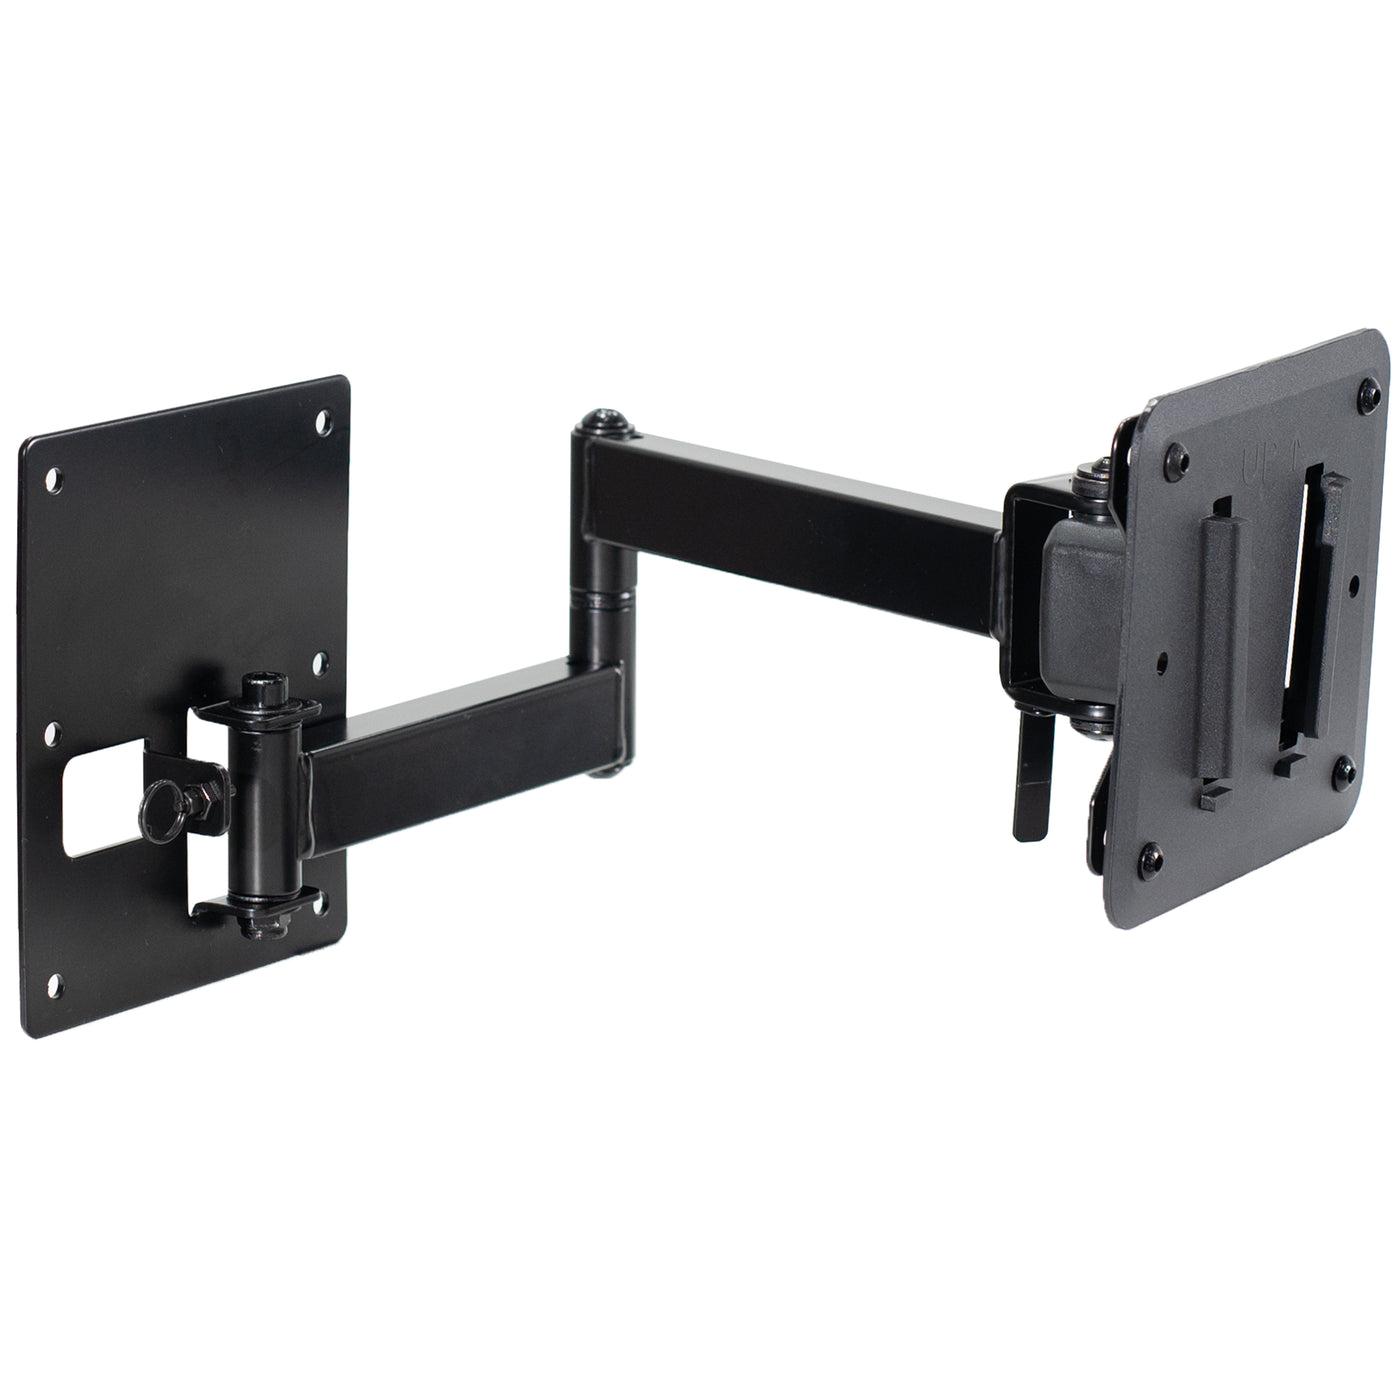 RV TV mount with articulating arm and locking mechanism.